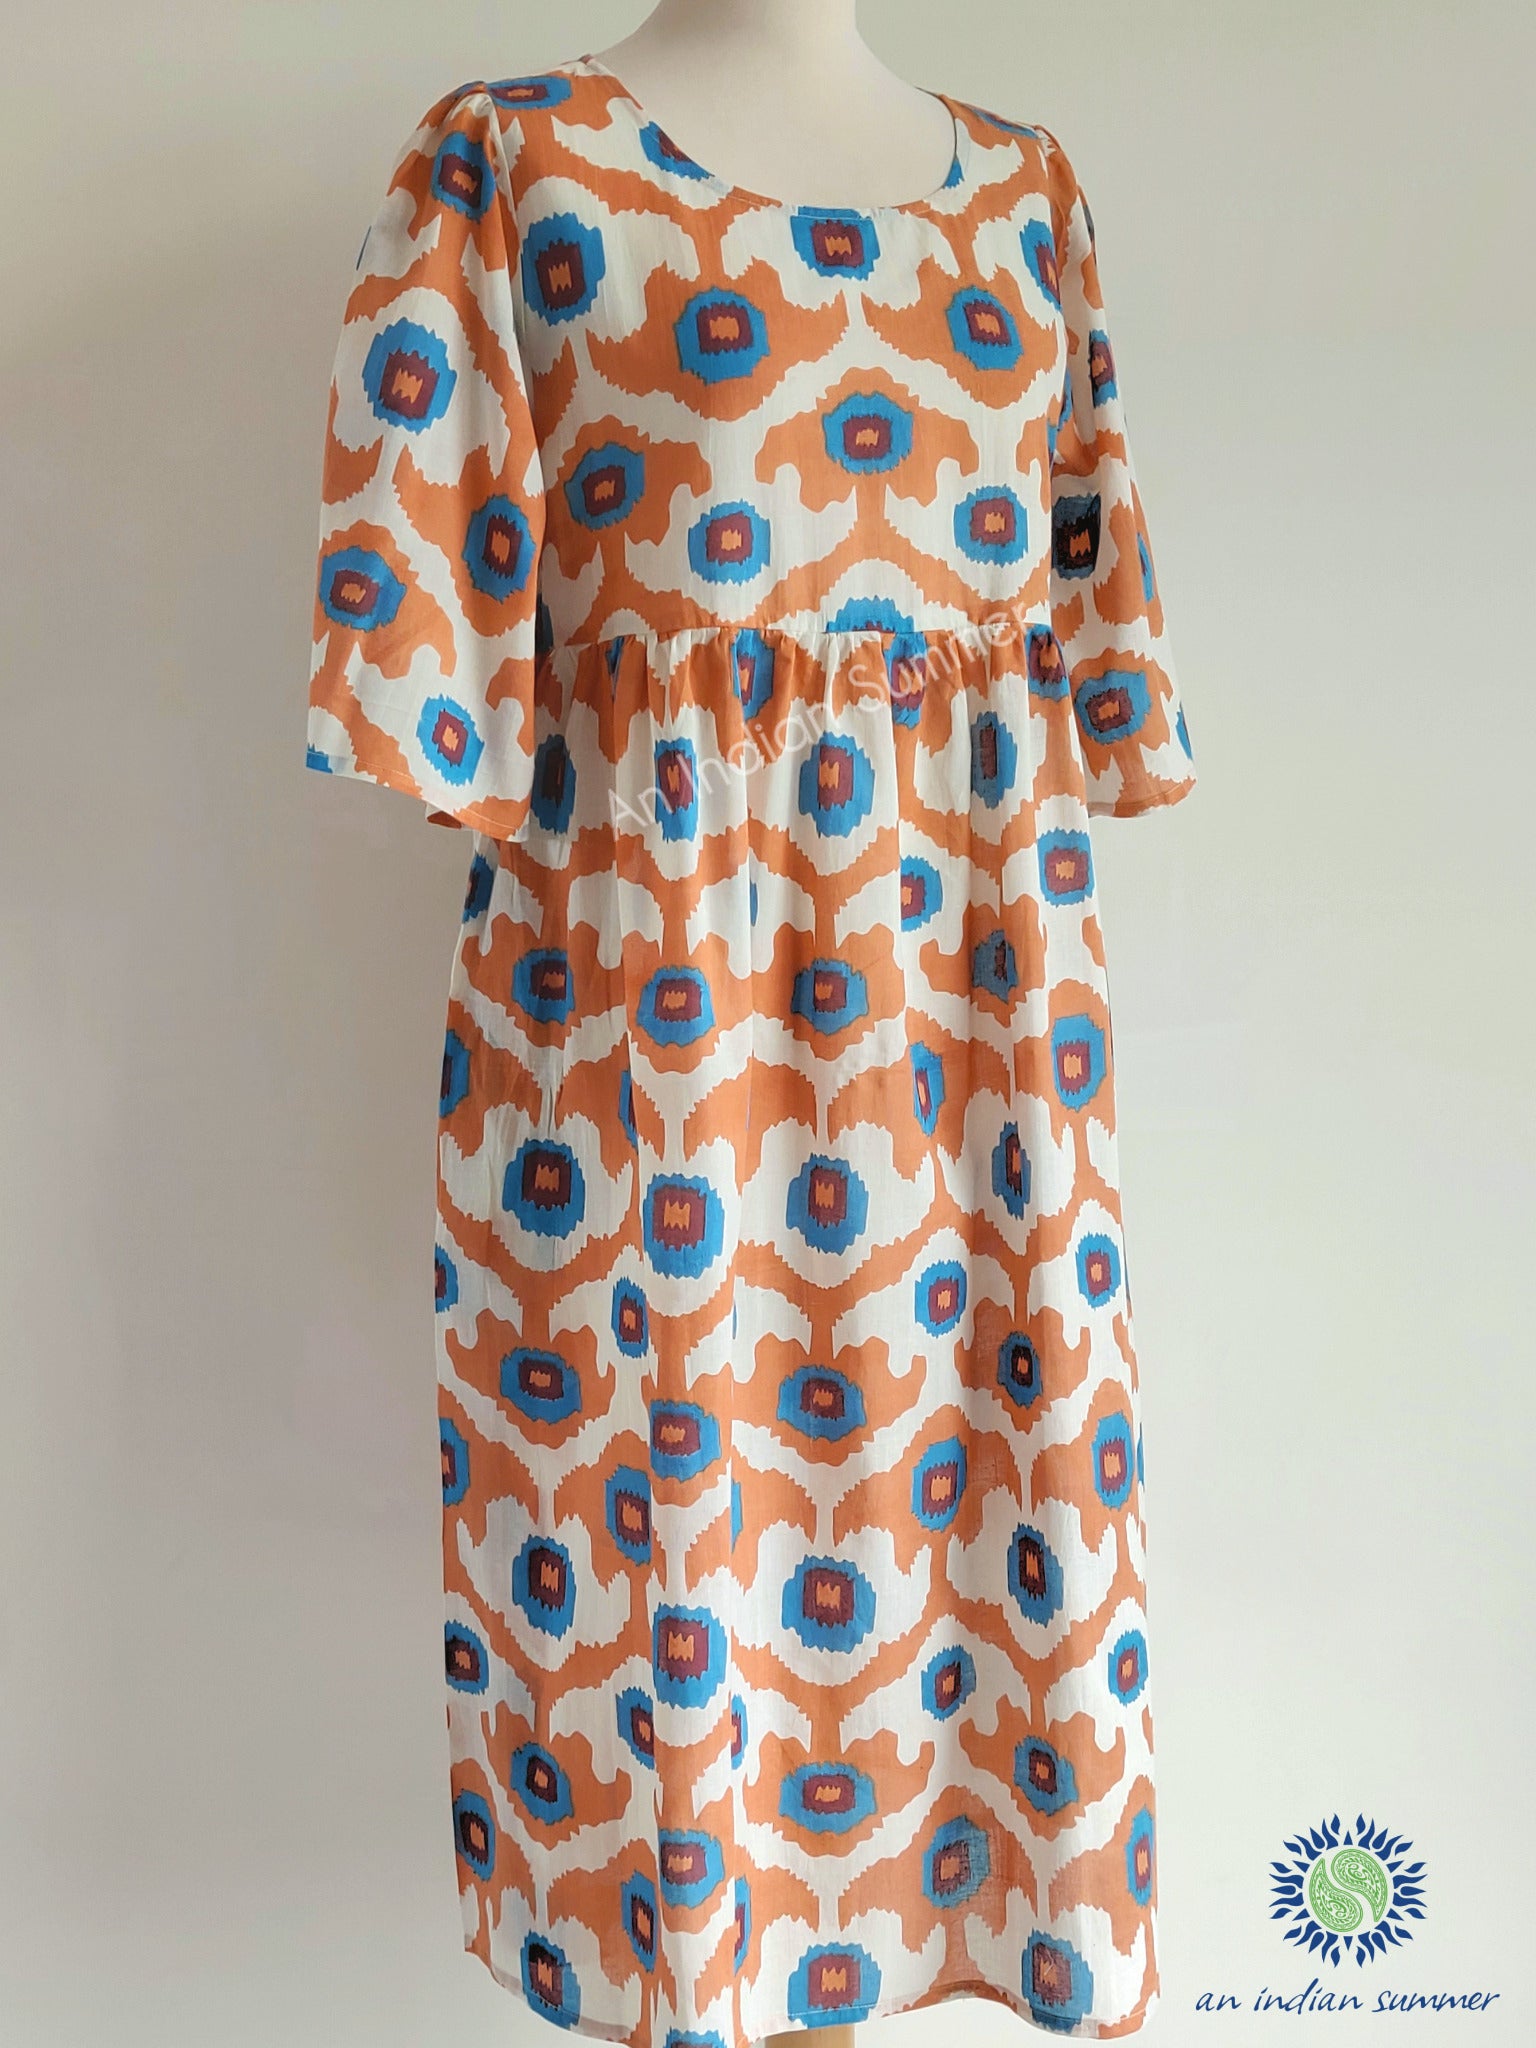 Oversized Market Dress Ikat Apricot Comfy easy-fit lightweight cotton dress with Two deep pockets An Indian Summer Timeless Sustainable Ethical Authentic Artisan Clothing Brand